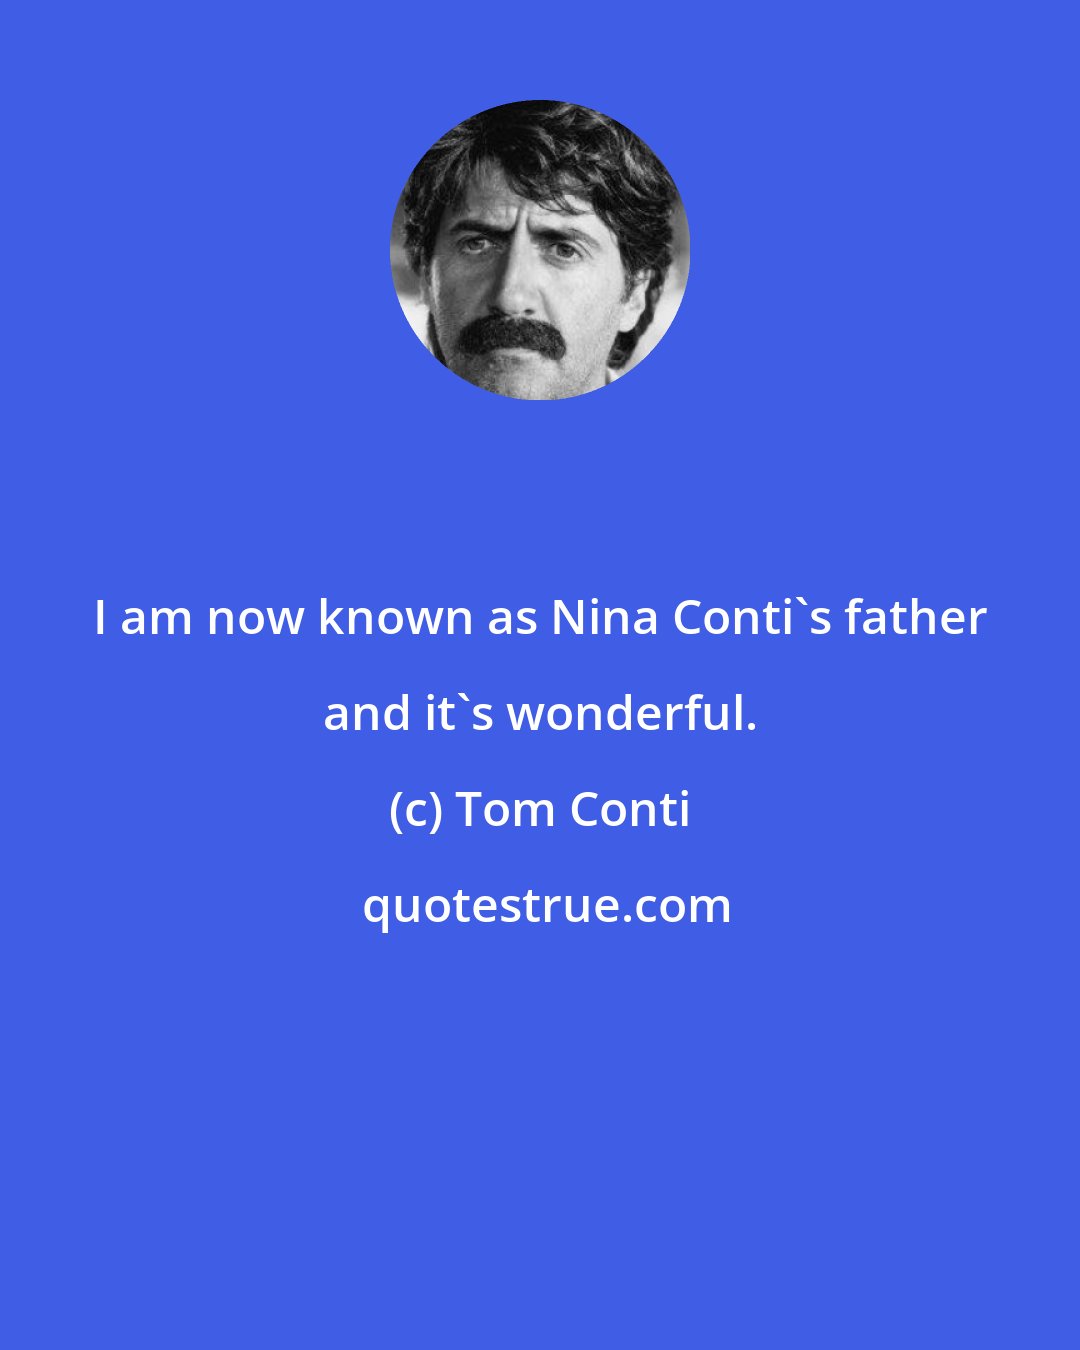 Tom Conti: I am now known as Nina Conti's father and it's wonderful.